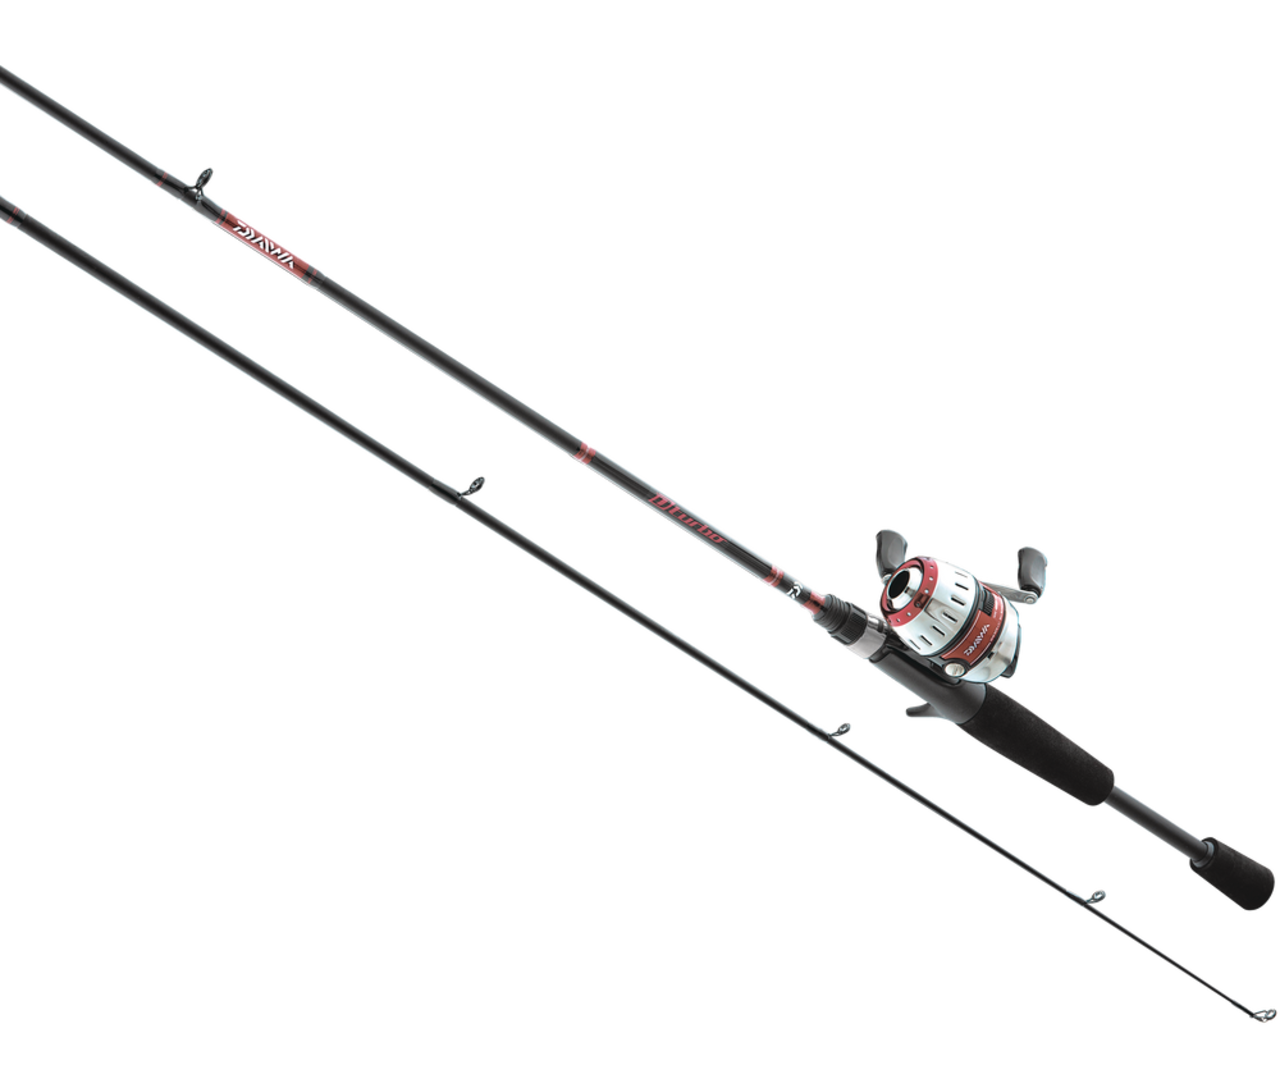 Daiwa D-Turbo DTE100 Spincast Fishing Rod and Reel Combo, Medium, Right  Hand, 6-ft